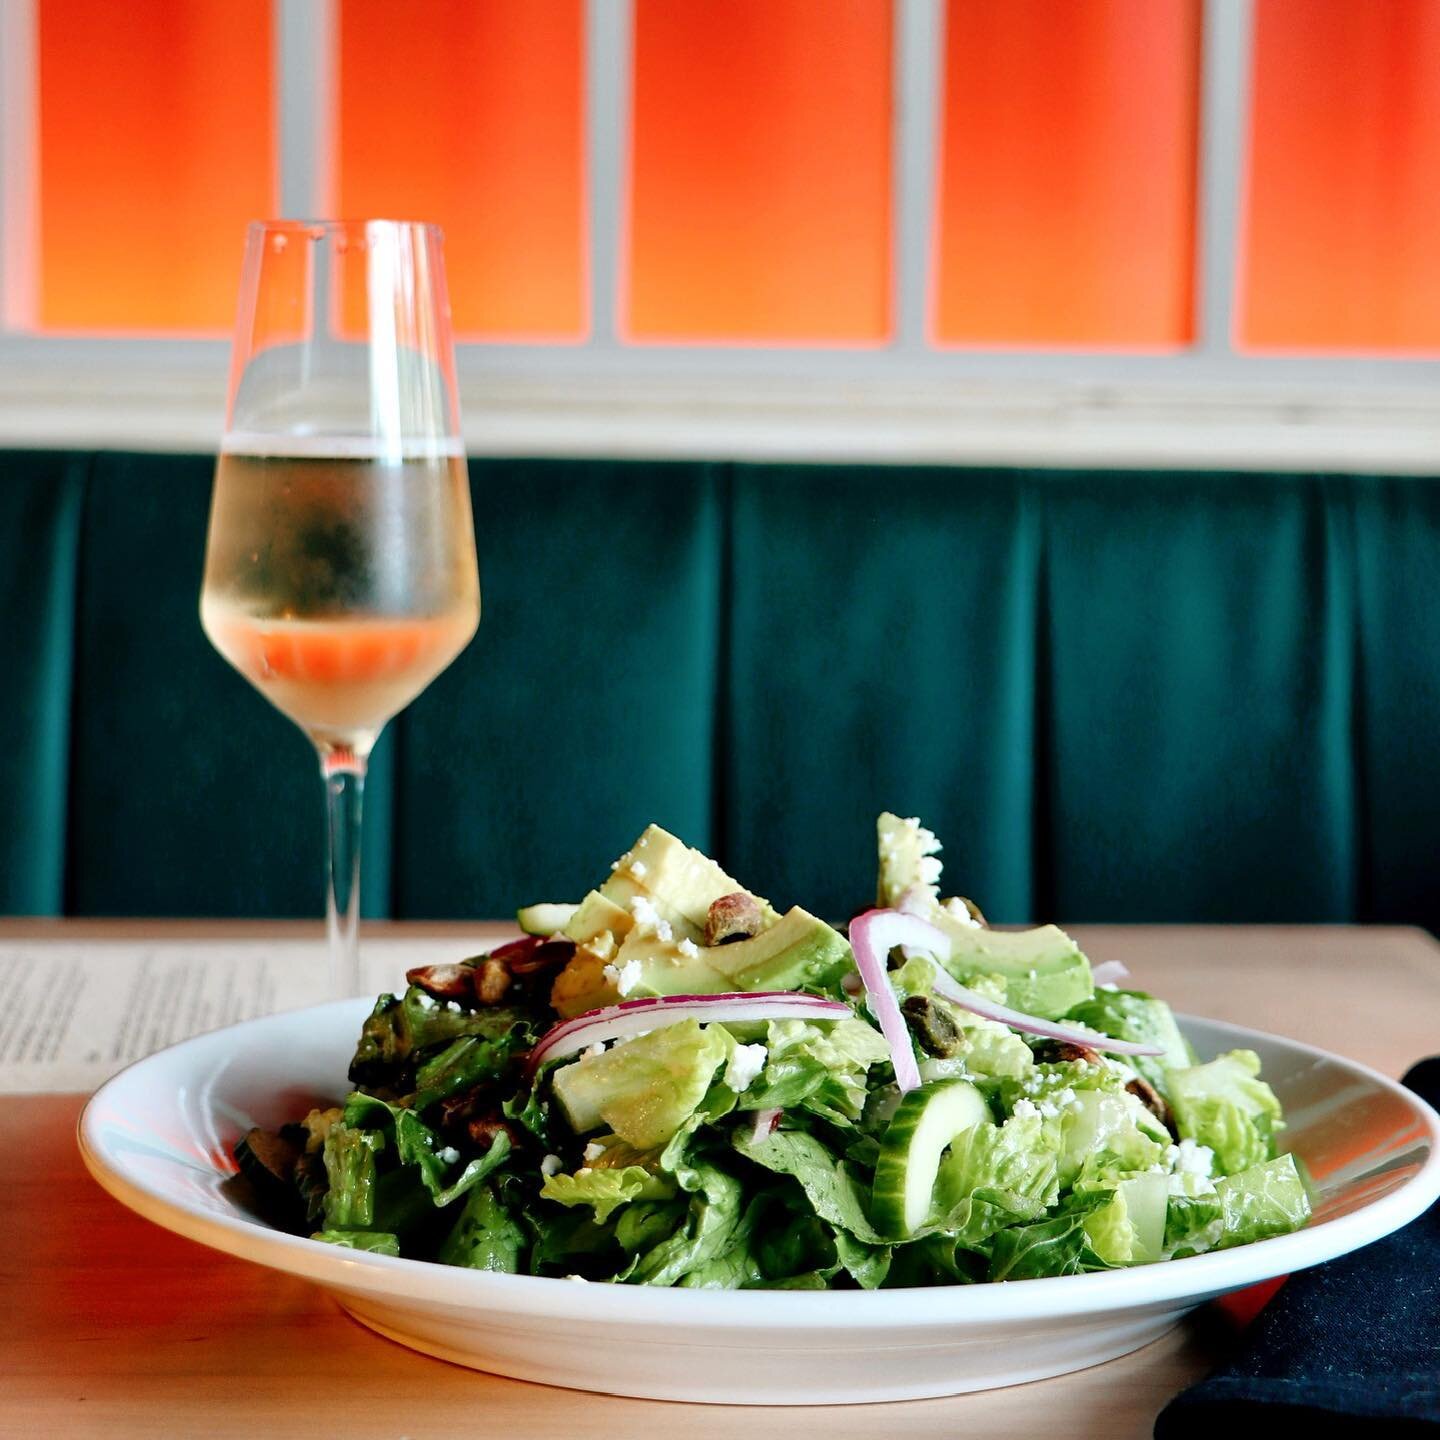 Don&rsquo;t waste a beautiful spring Wednesday and come join us for happy hour! $4 Market Garden Beers &amp; $5 house wine from 5-7p! Every Wednesday &amp; Thursday evening! 💗✨🎀
.
.
.
Avocado Salad- shredded romaine, feta, avocado, hardbolid egg, c